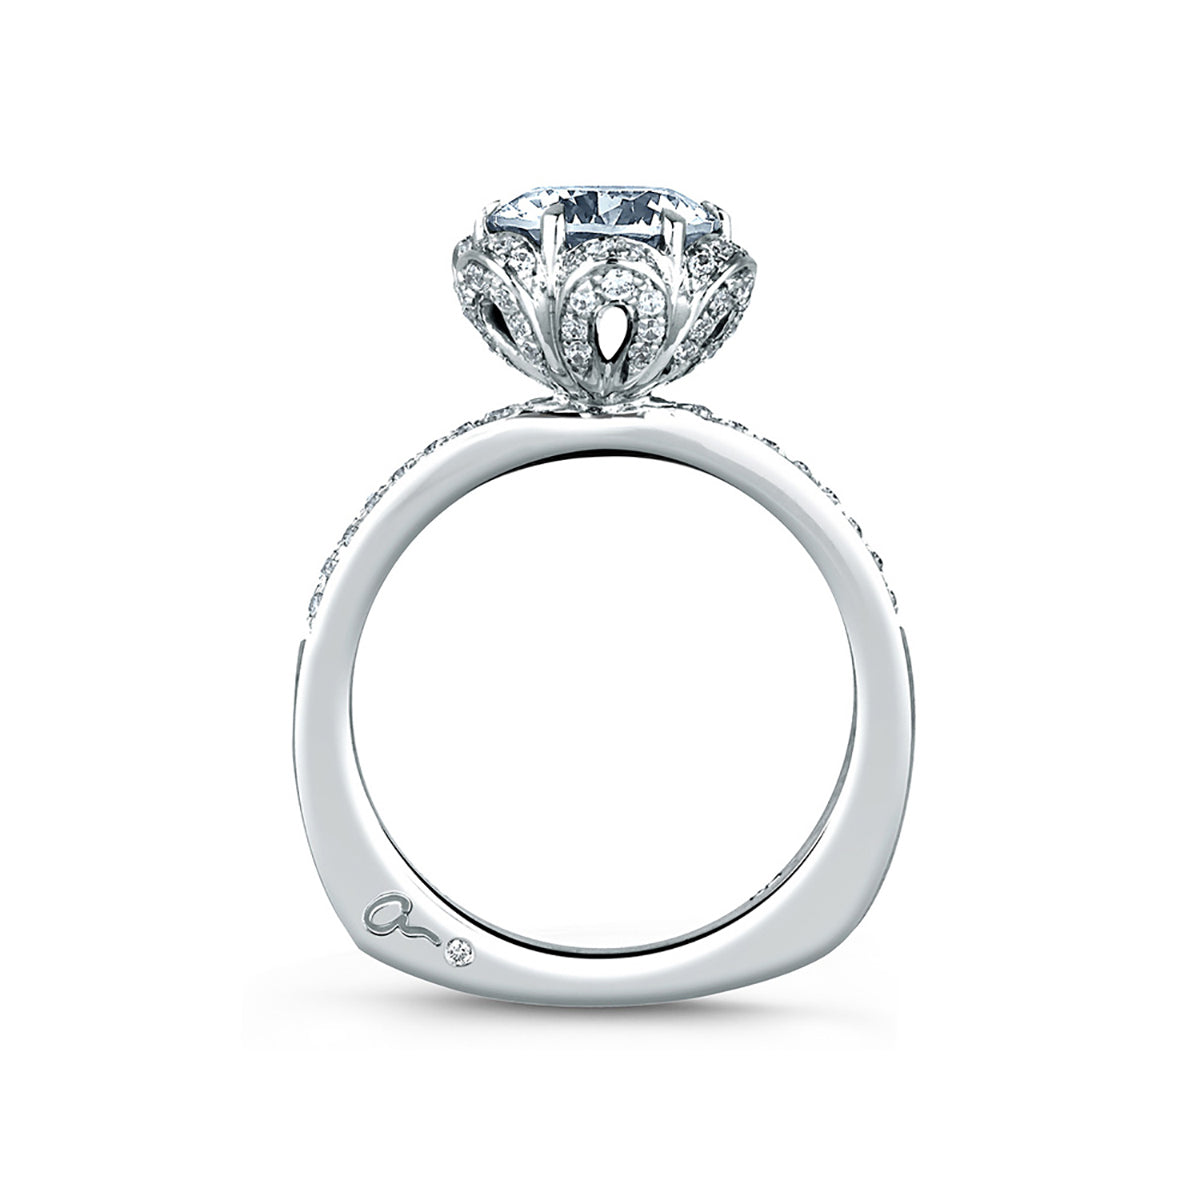 A.Jaffe Nature Inspired Tulip Halo Diamond Engagement Ring MES560/155